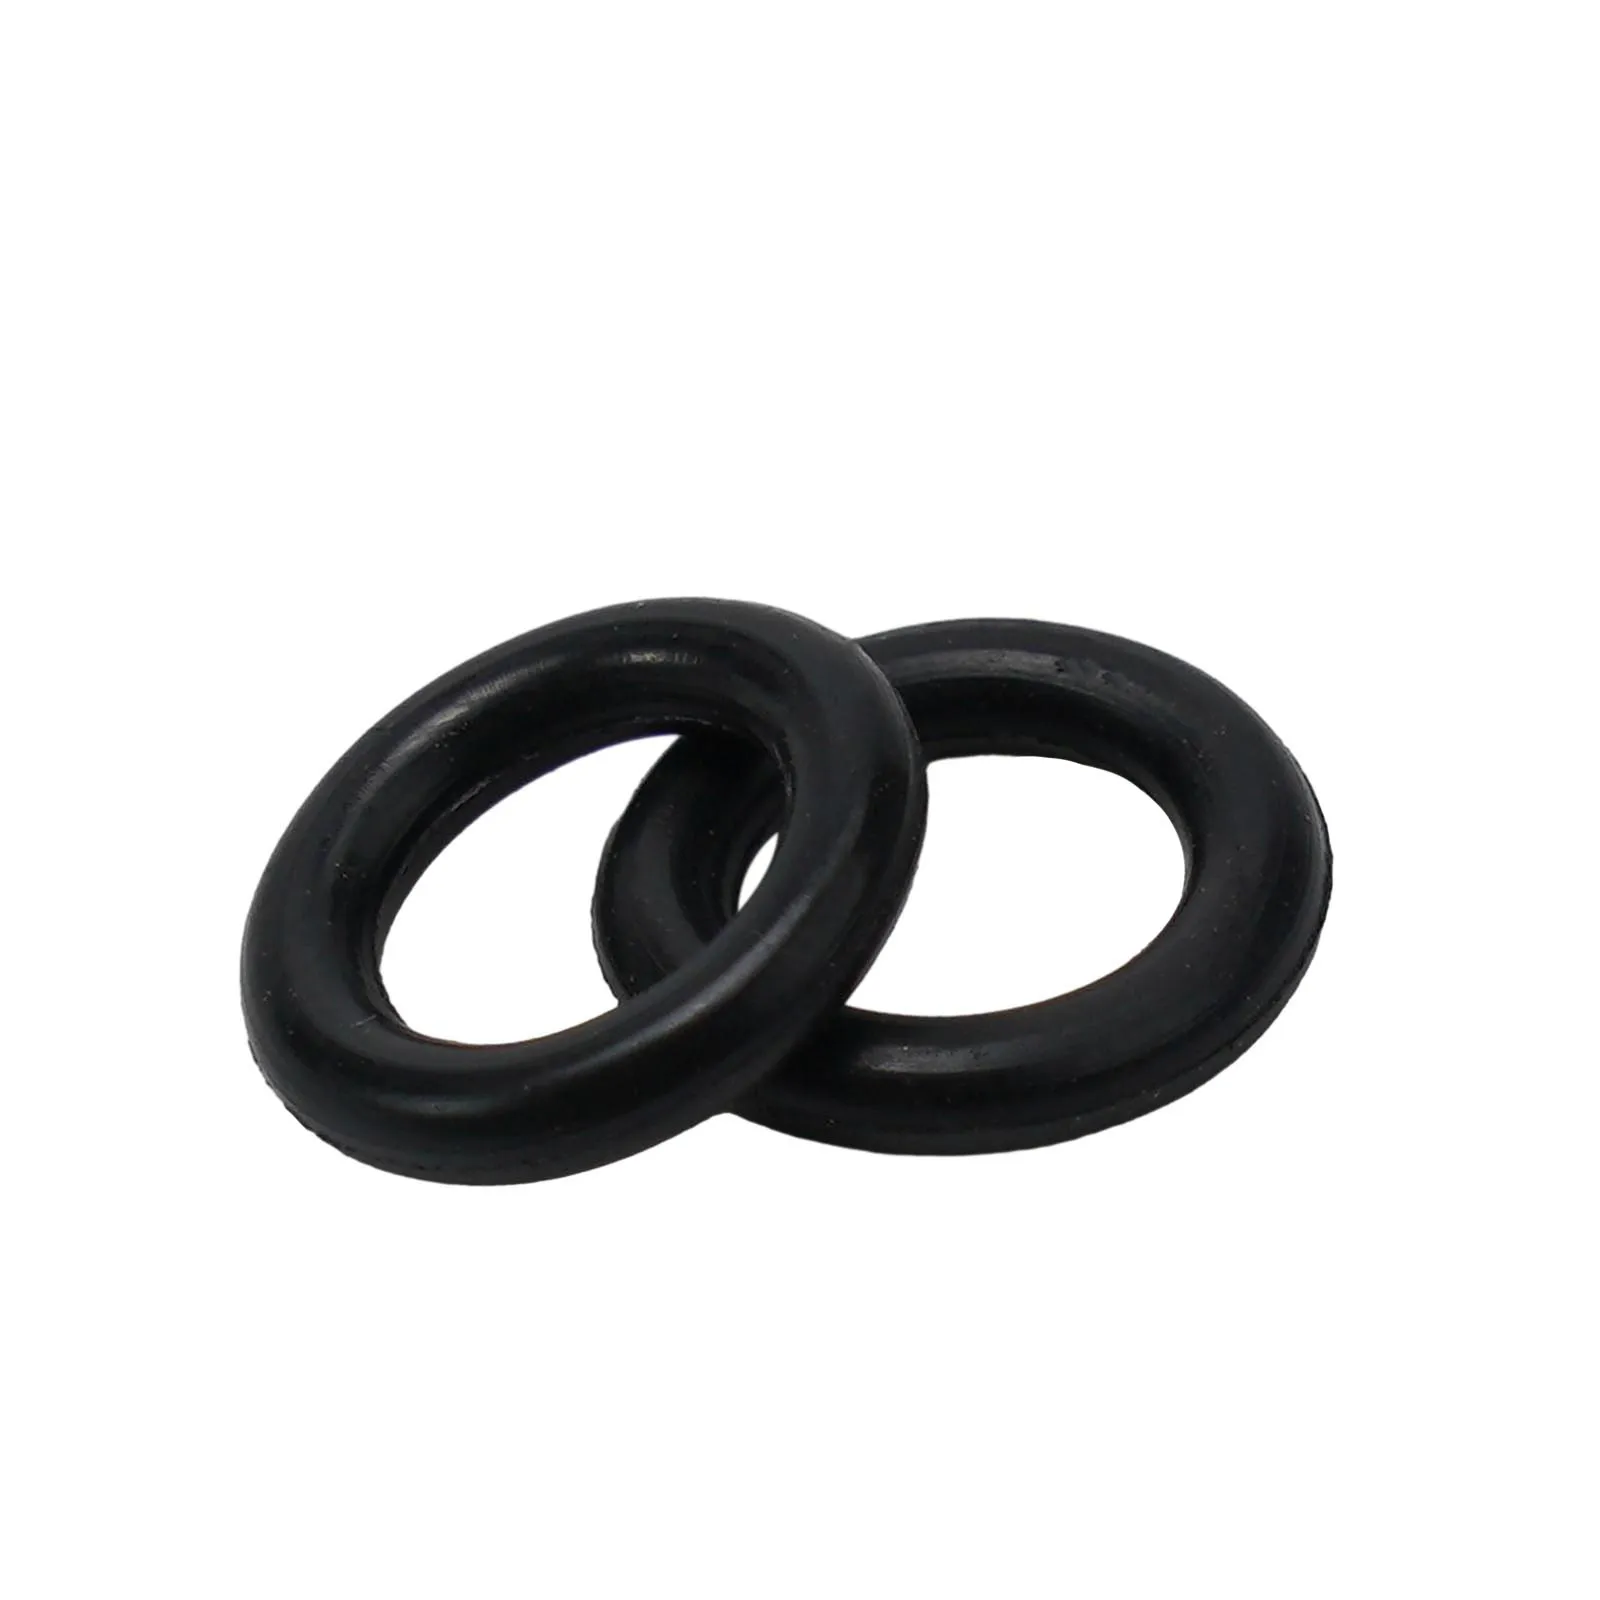 Washer O-Rings Brand New High Quality New Replacement 5pcs Pressure Washer Hose Outdoor Power Equipment Hose Male Thread